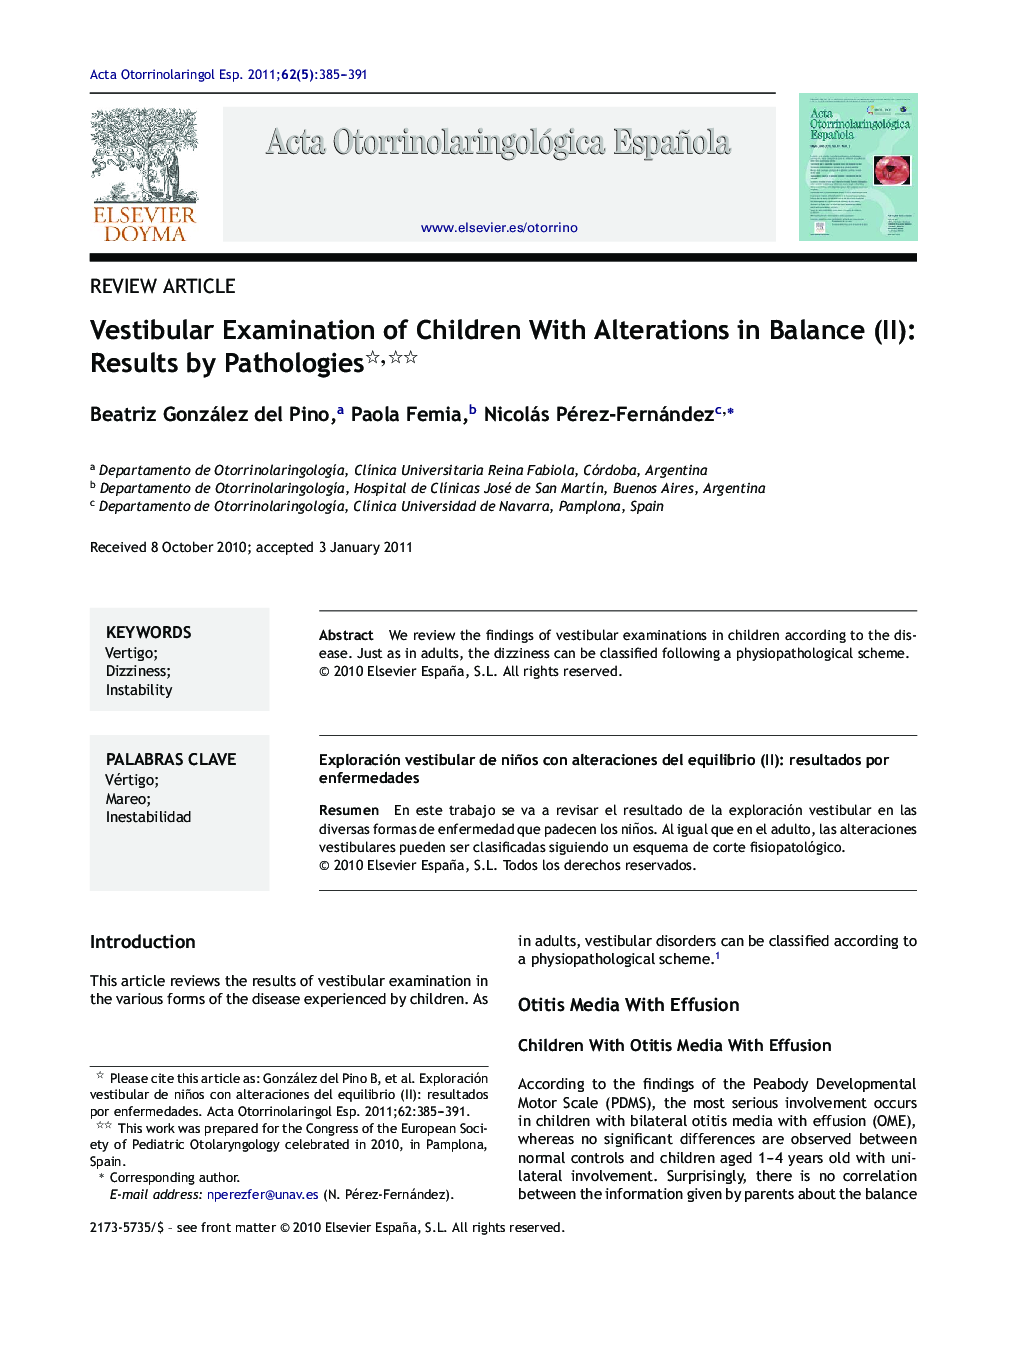 Vestibular Examination of Children With Alterations in Balance (II): Results by Pathologies 